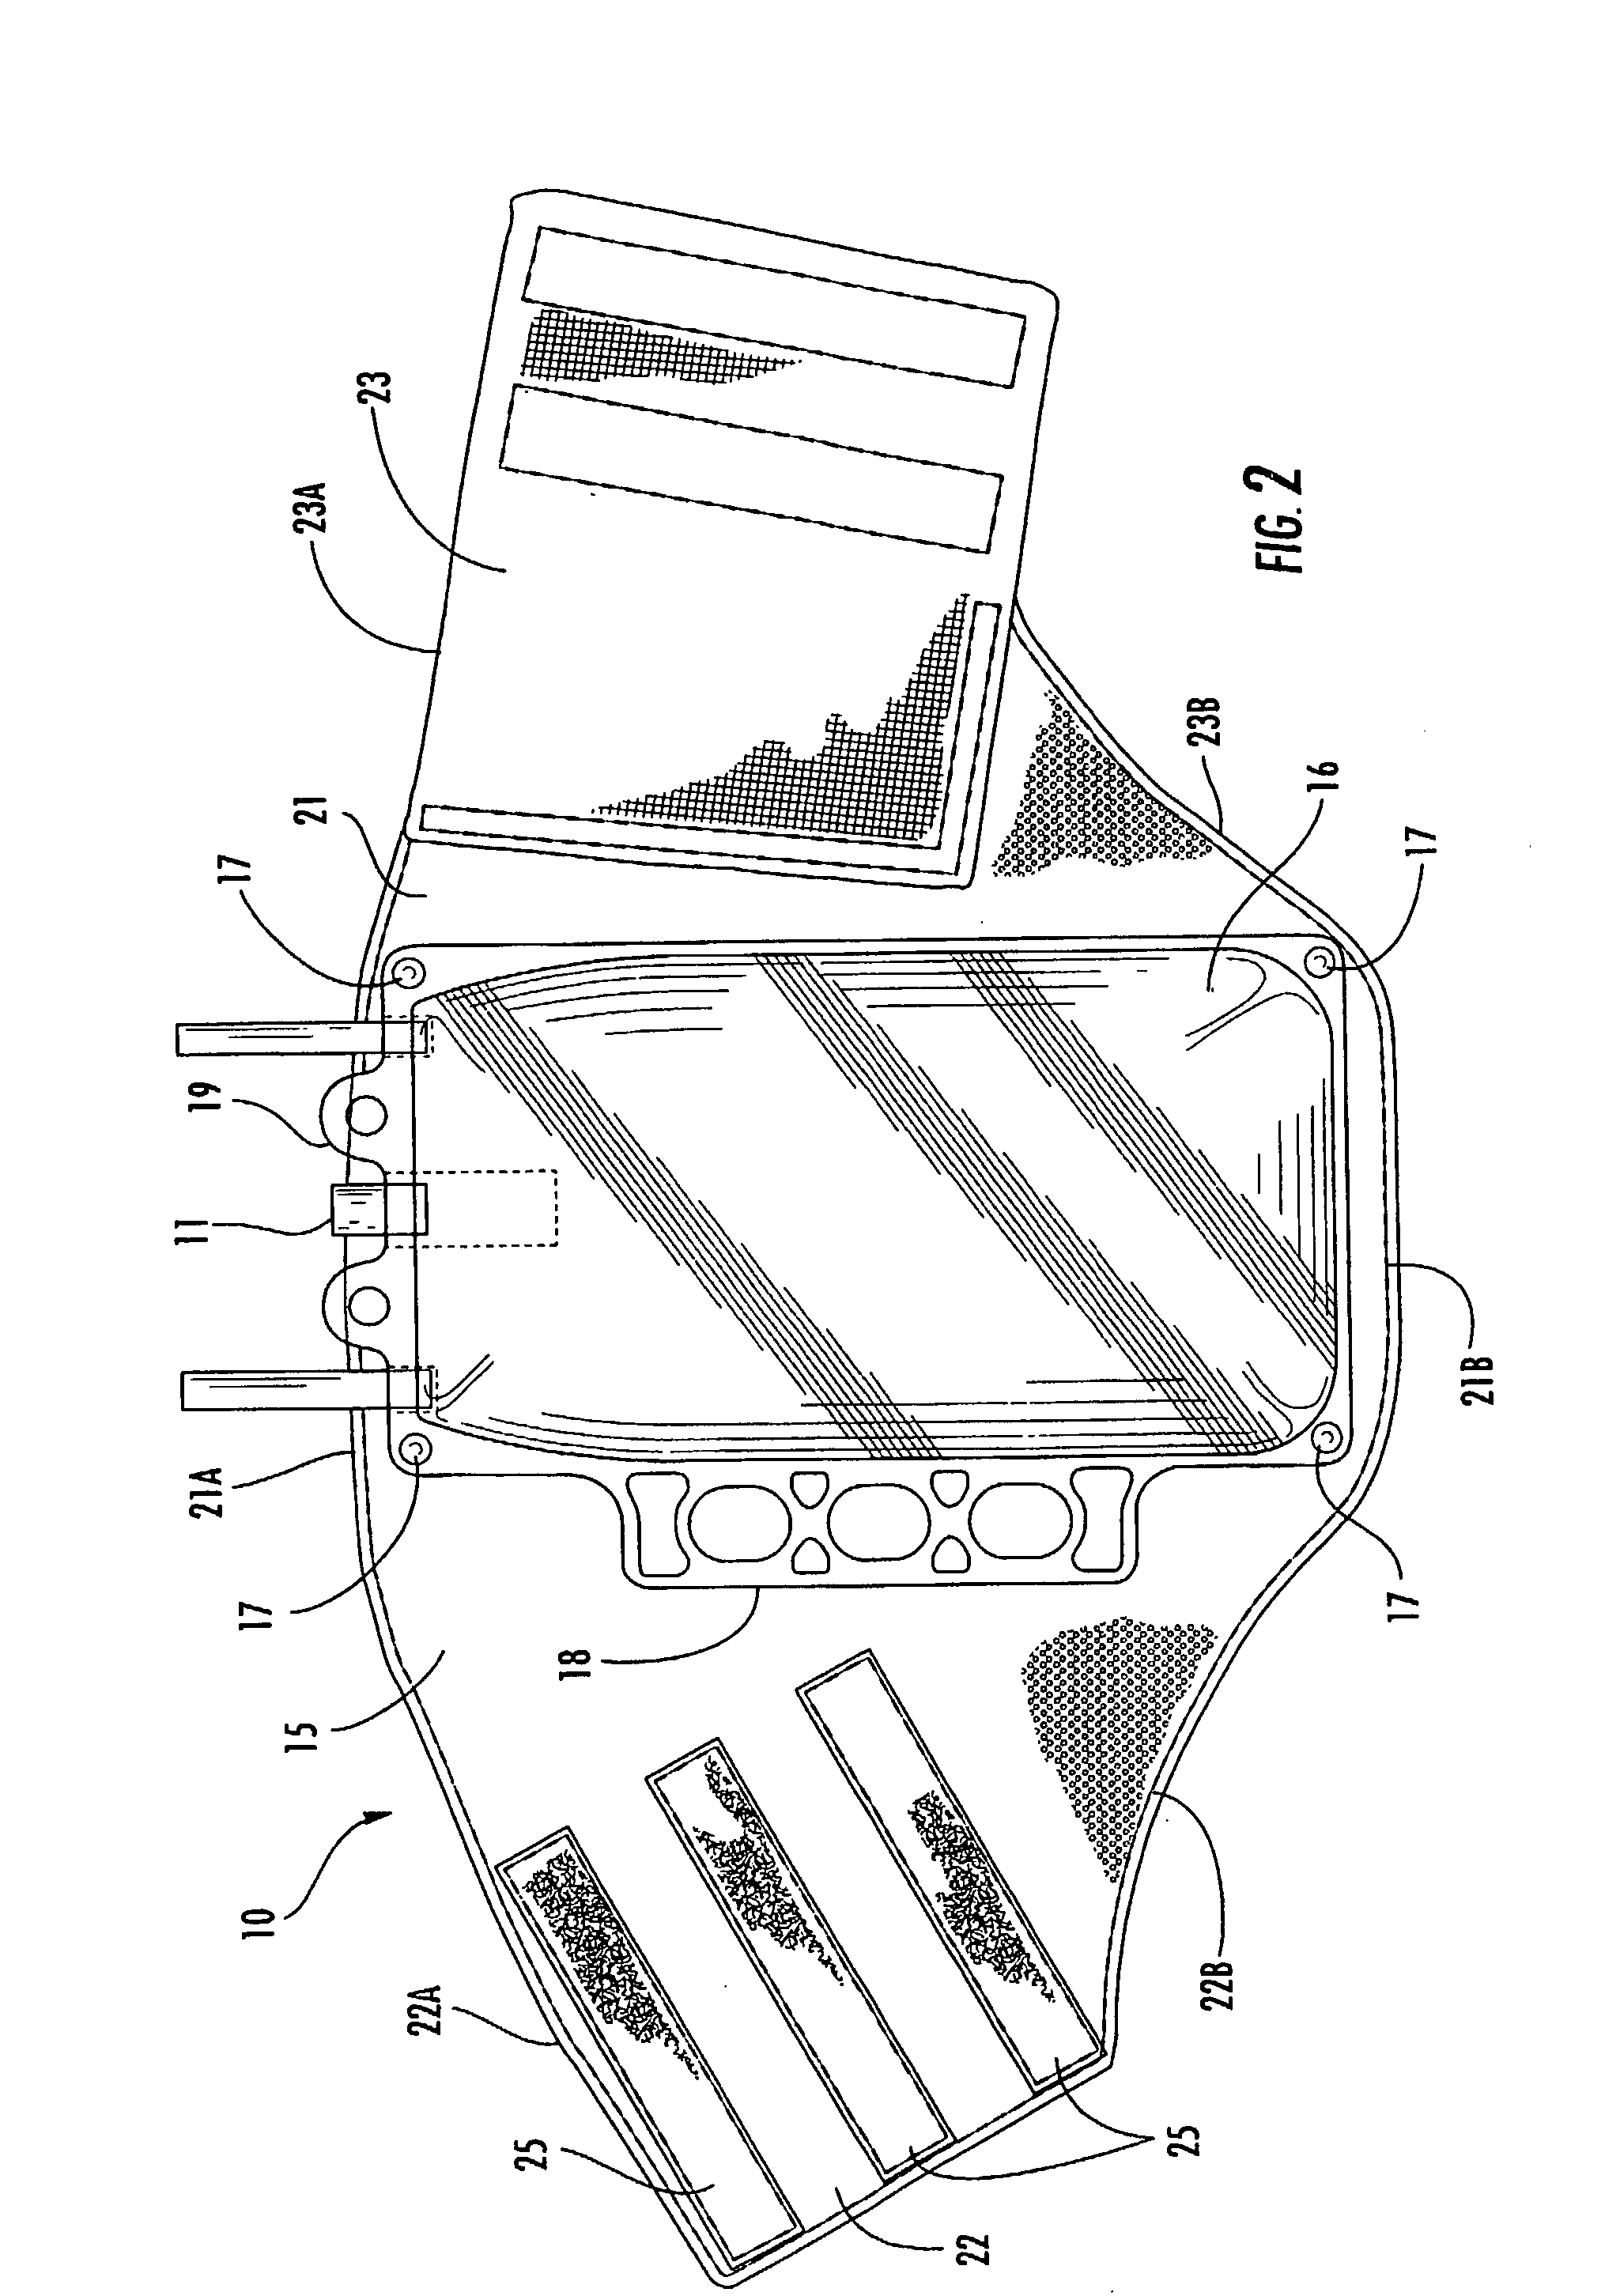 Flexible Bag Wrap Adapted For Use In An Incontinence Management System